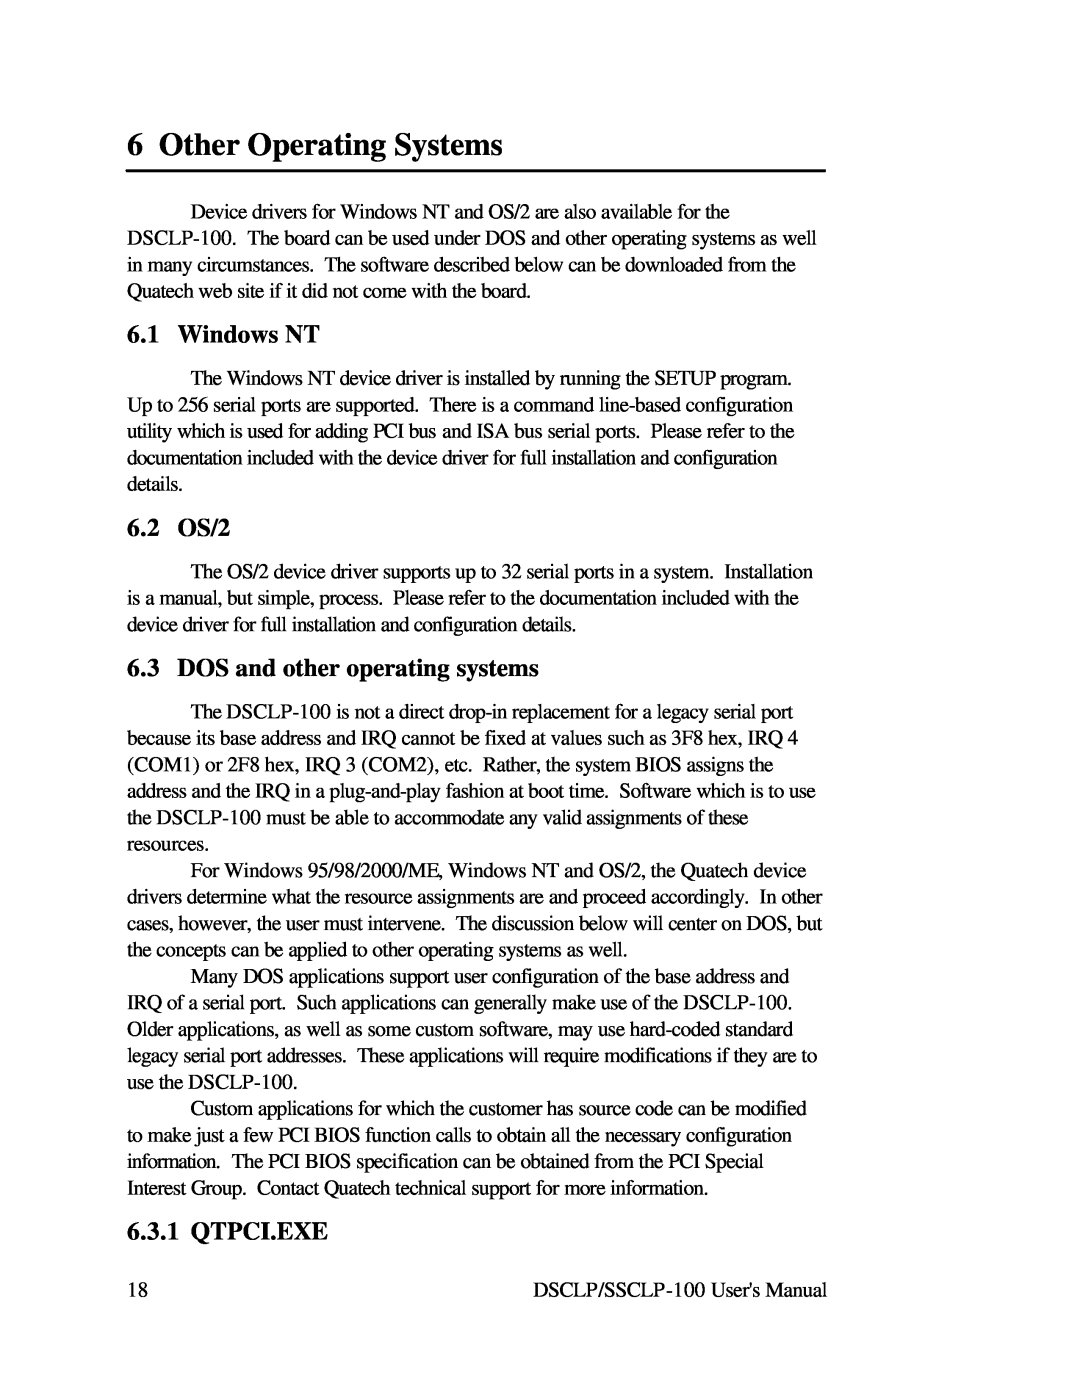 Quatech DSCLP-100 user manual Other Operating Systems, Windows NT, 6.2 OS/2, DOS and other operating systems, Qtpci.Exe 